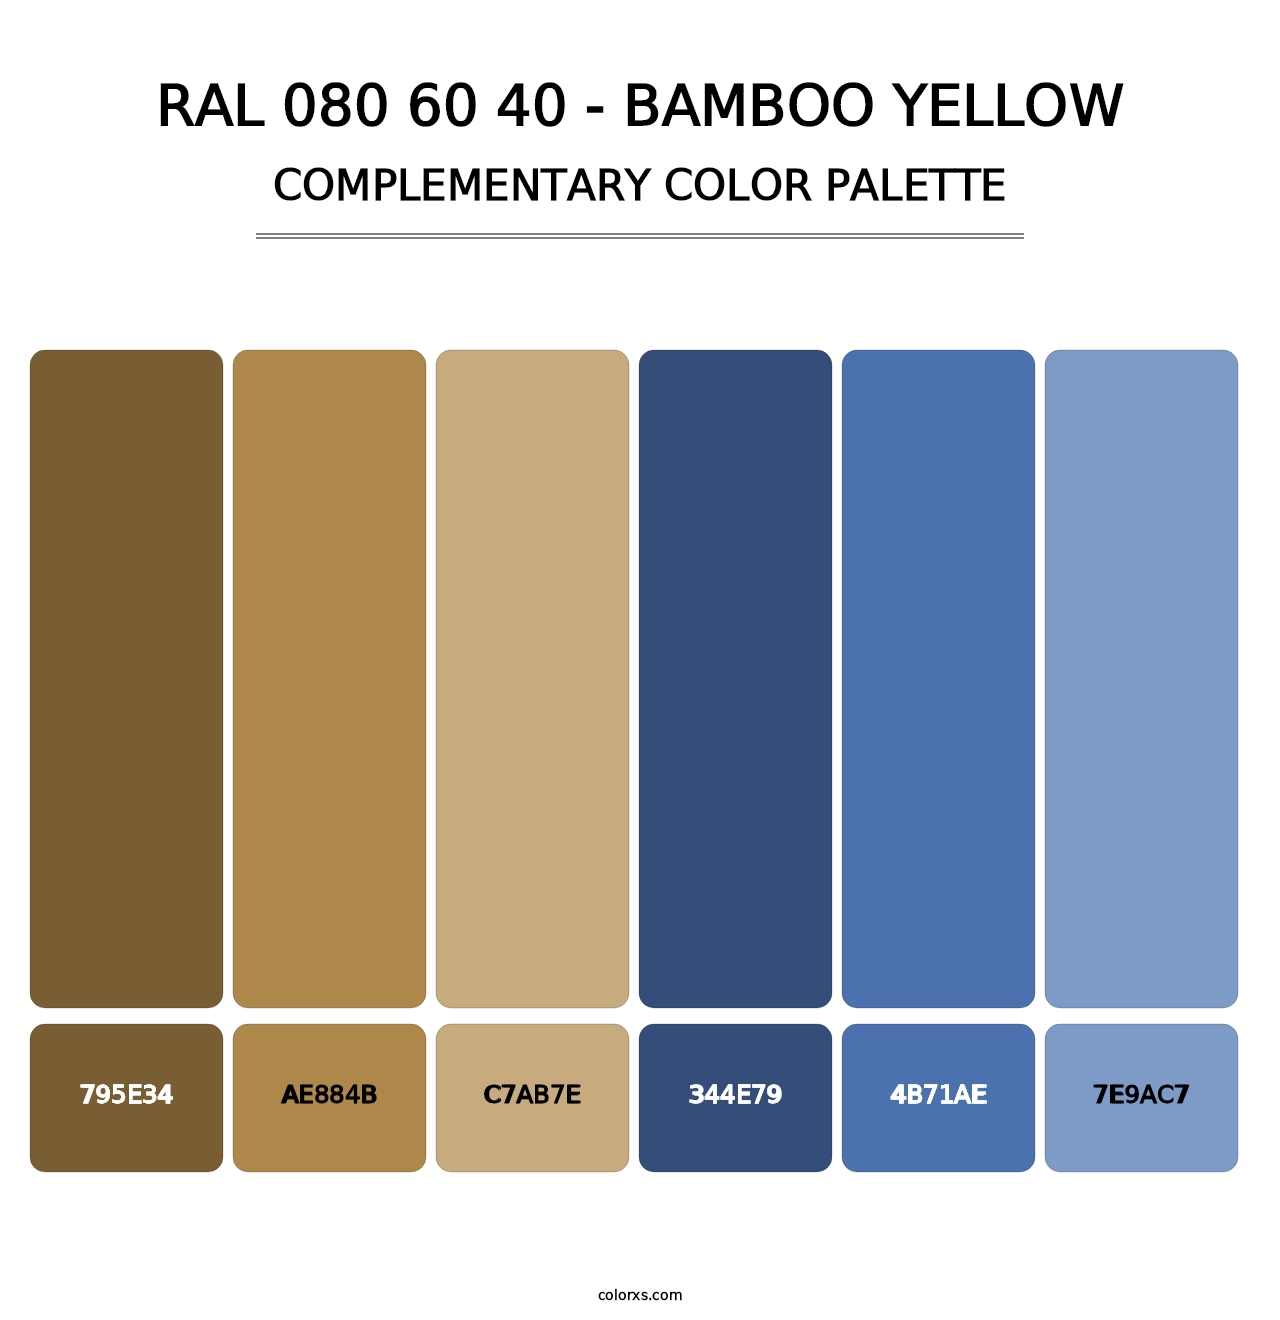 RAL 080 60 40 - Bamboo Yellow - Complementary Color Palette